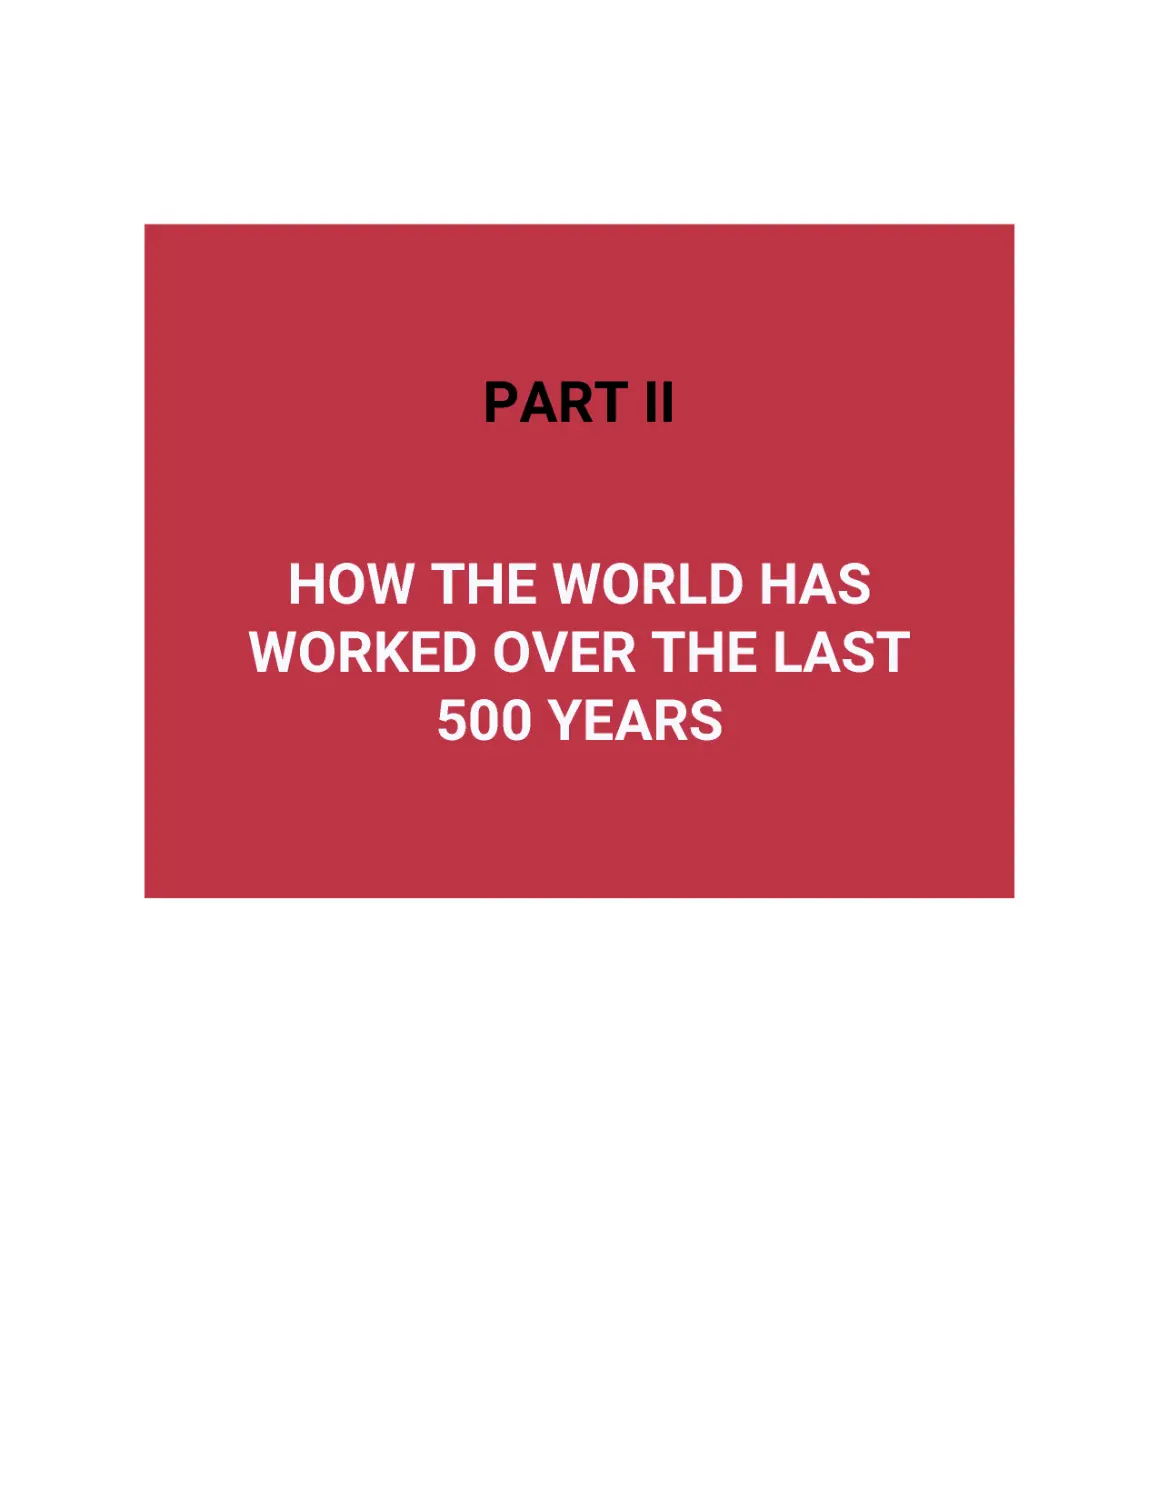 ﻿Part II: How the World Has Worked Over the Last 500 Year